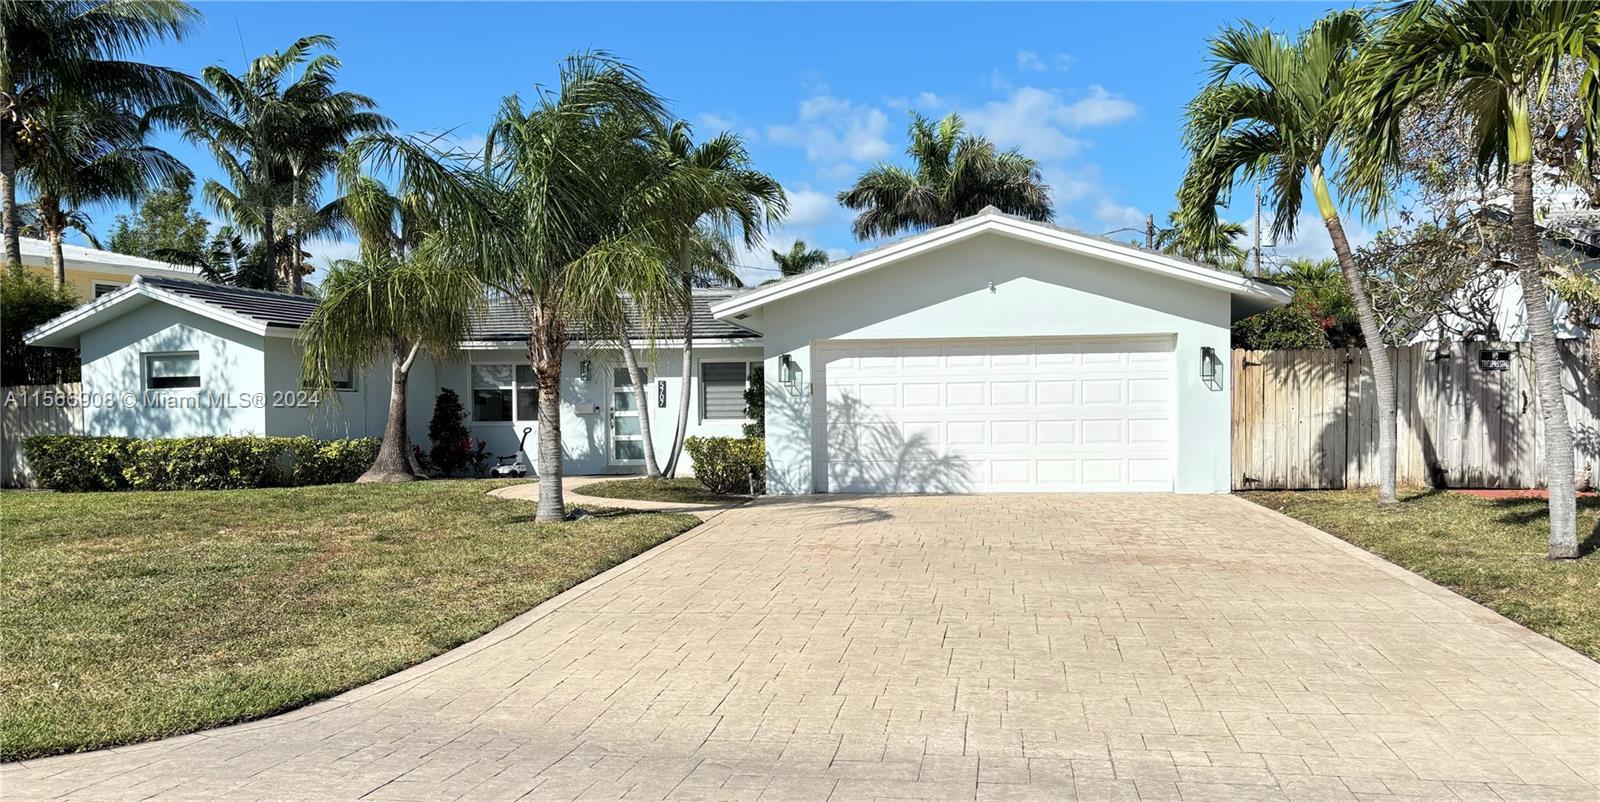 Nestled in the heart of Coral Ridge Isles, this charming home is a true find for its fortunate new o